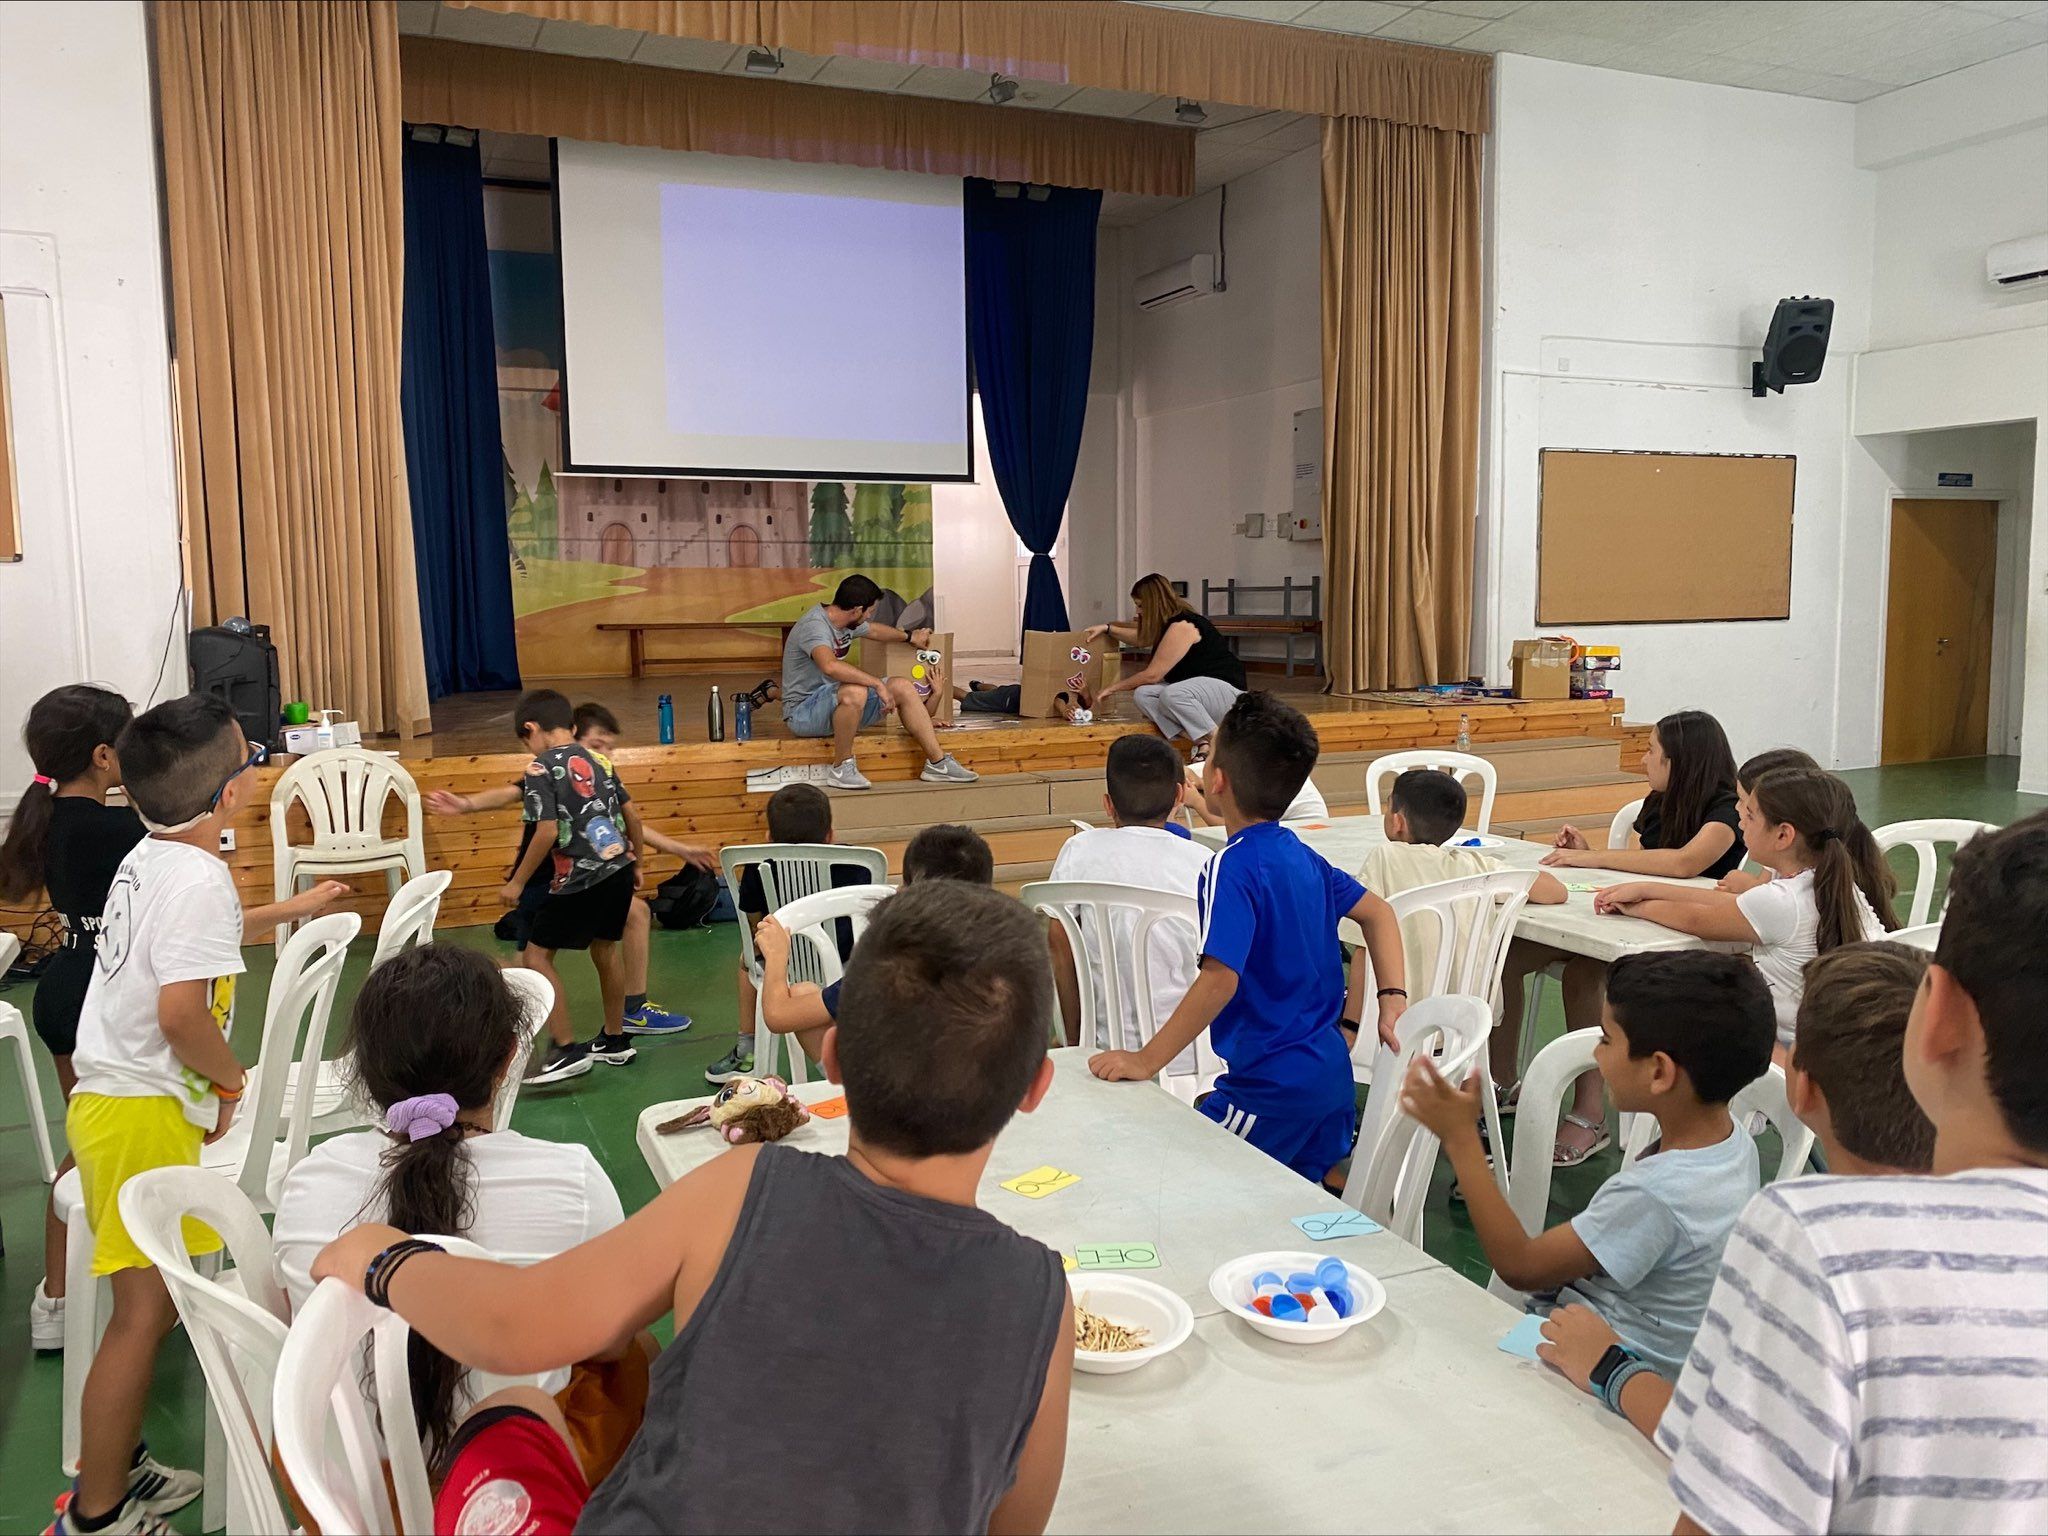 Workshop in Cyprus – Implementing PW-PBS practices with ECEC children